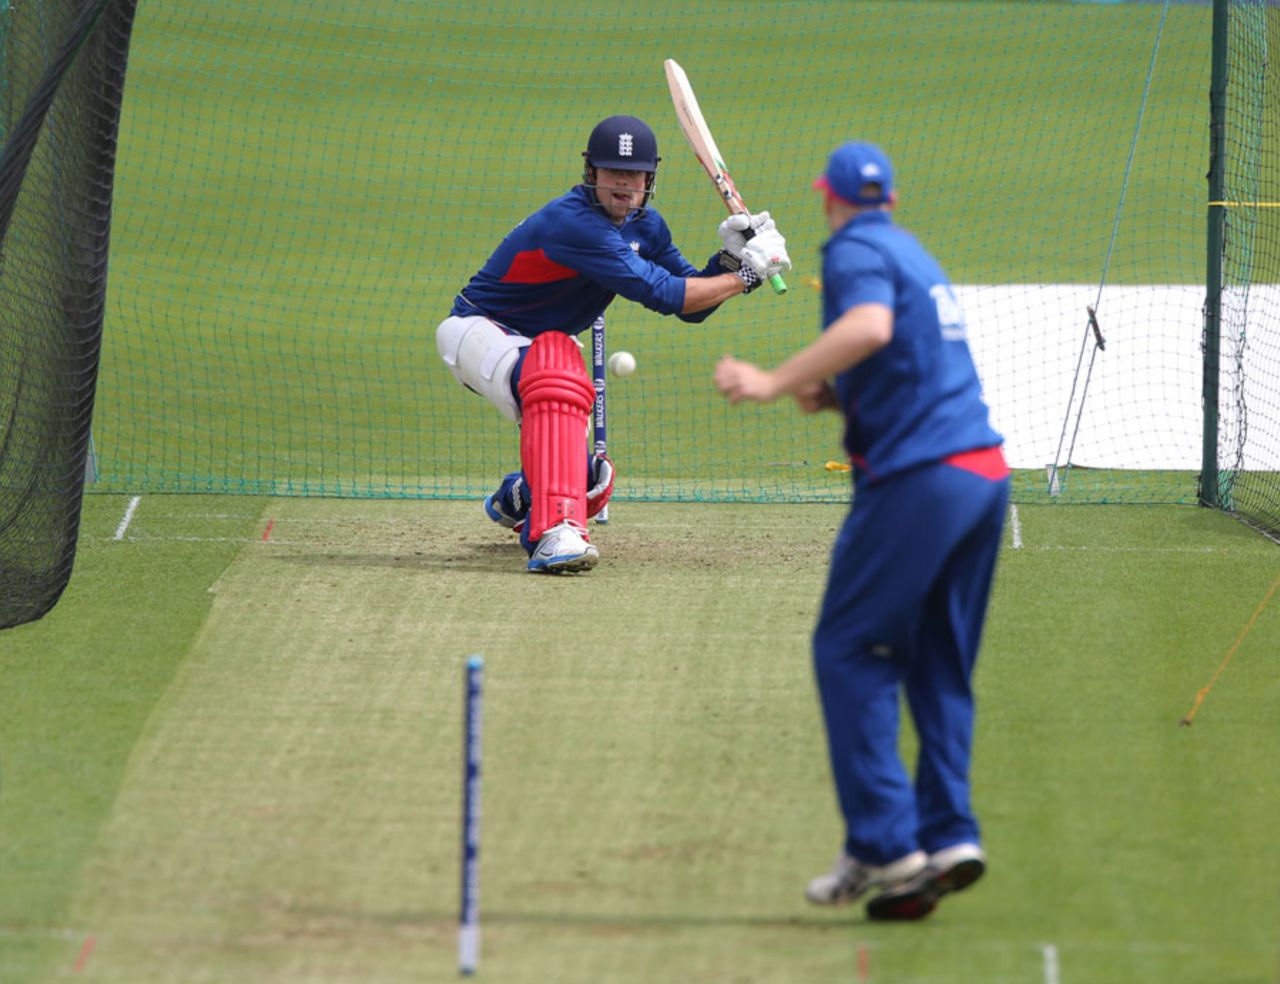 Alastair Cook practises in the nets against James Tredwell, Champions Trophy, Cardiff, June 15, 2013